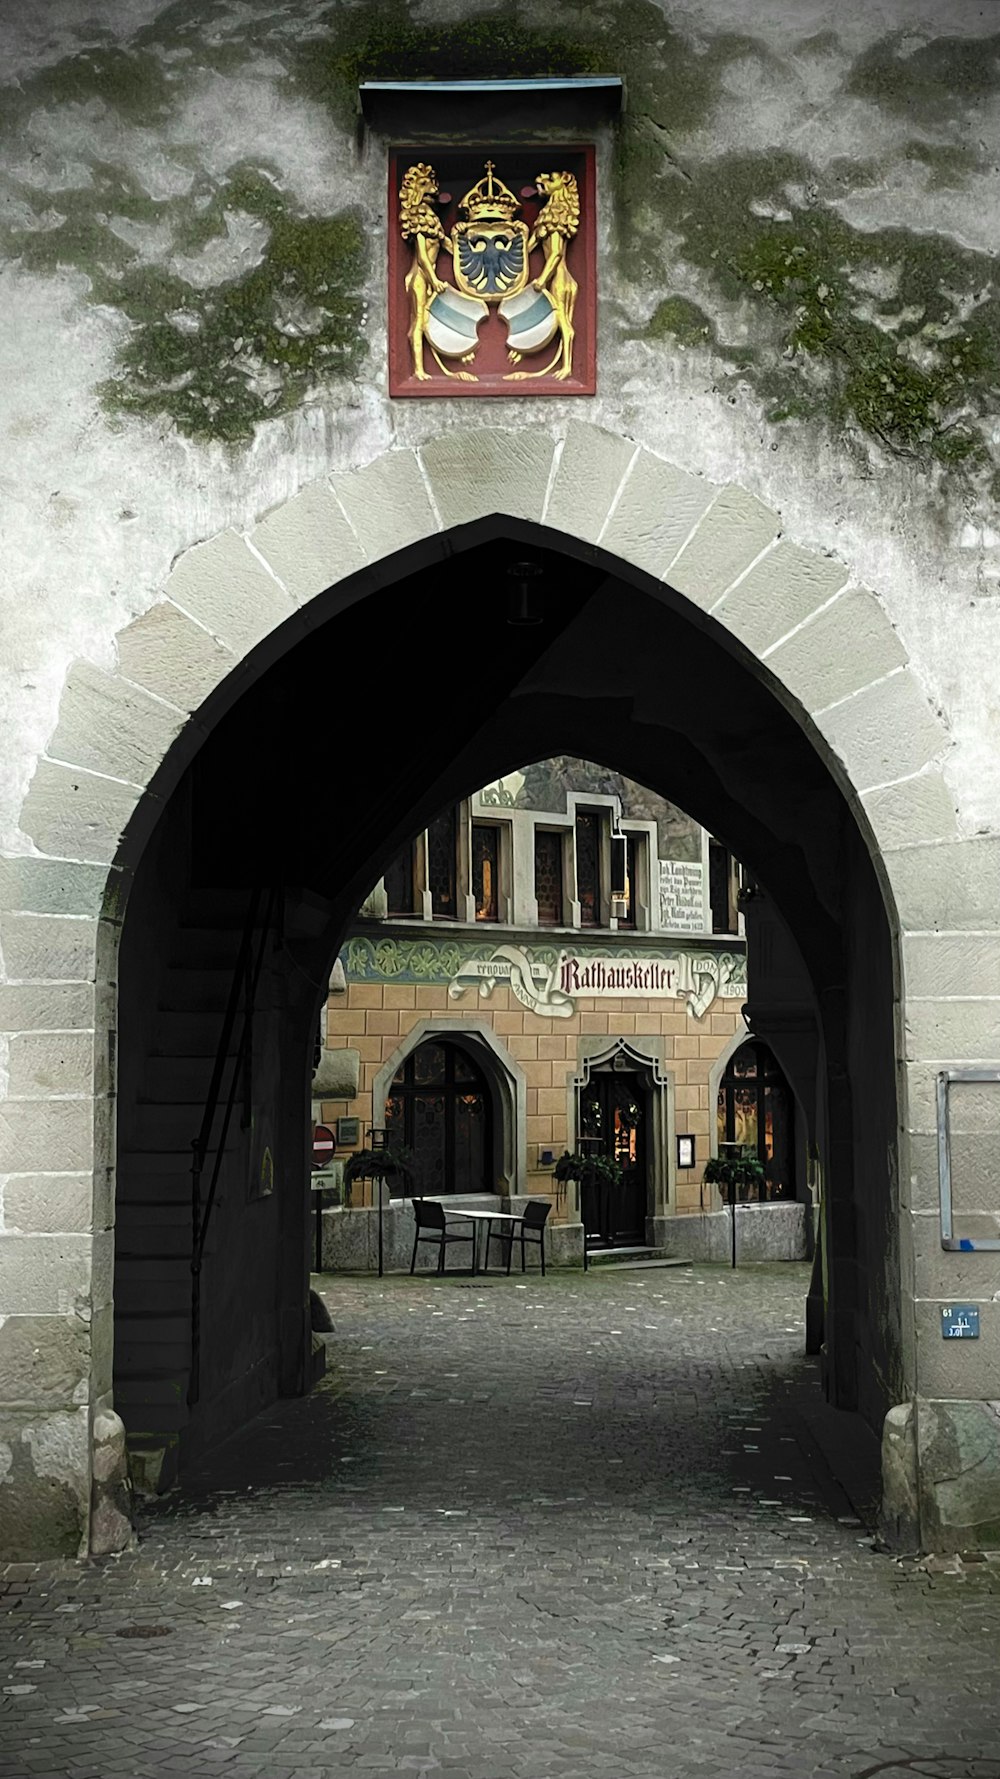 an archway leading to a building with a coat of arms on it